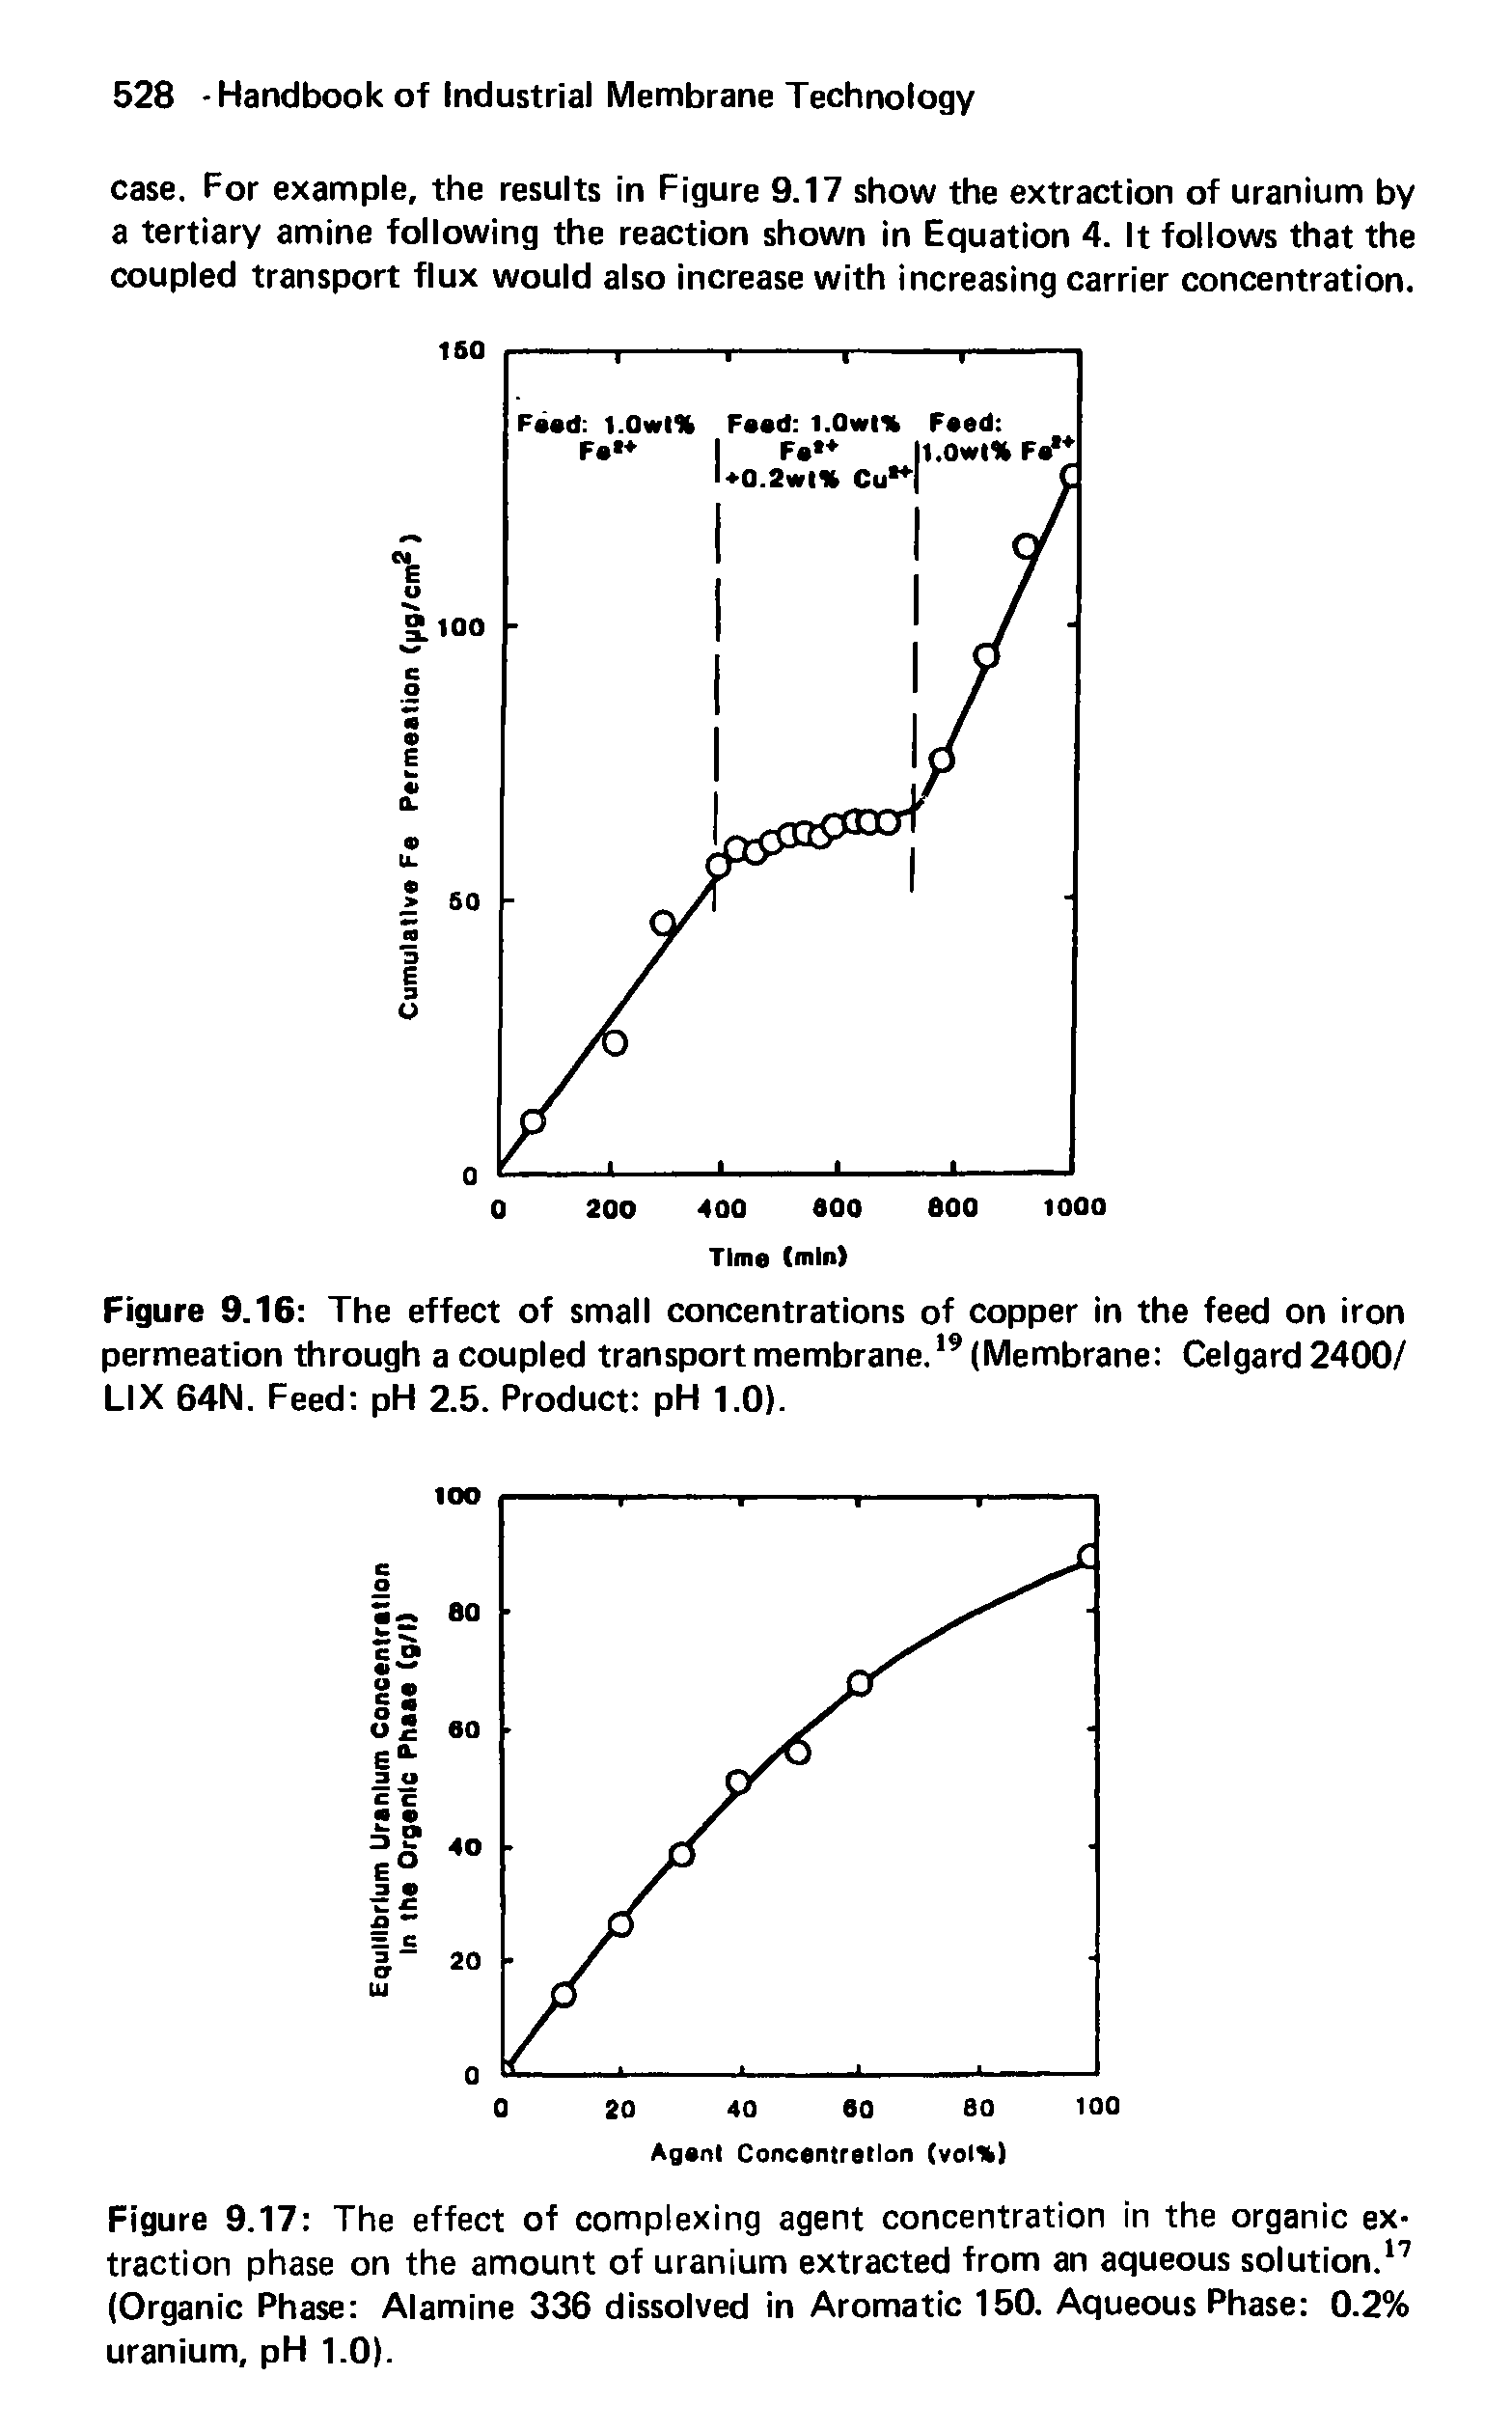 Figure 9.17 The effect of complexing agent concentration in the organic extraction phase on the amount of uranium extracted from an aqueous solution.17 (Organic Phase Alamine 336 dissolved in Aromatic 150. Aqueous Phase 0.2% uranium, pH 1.0).